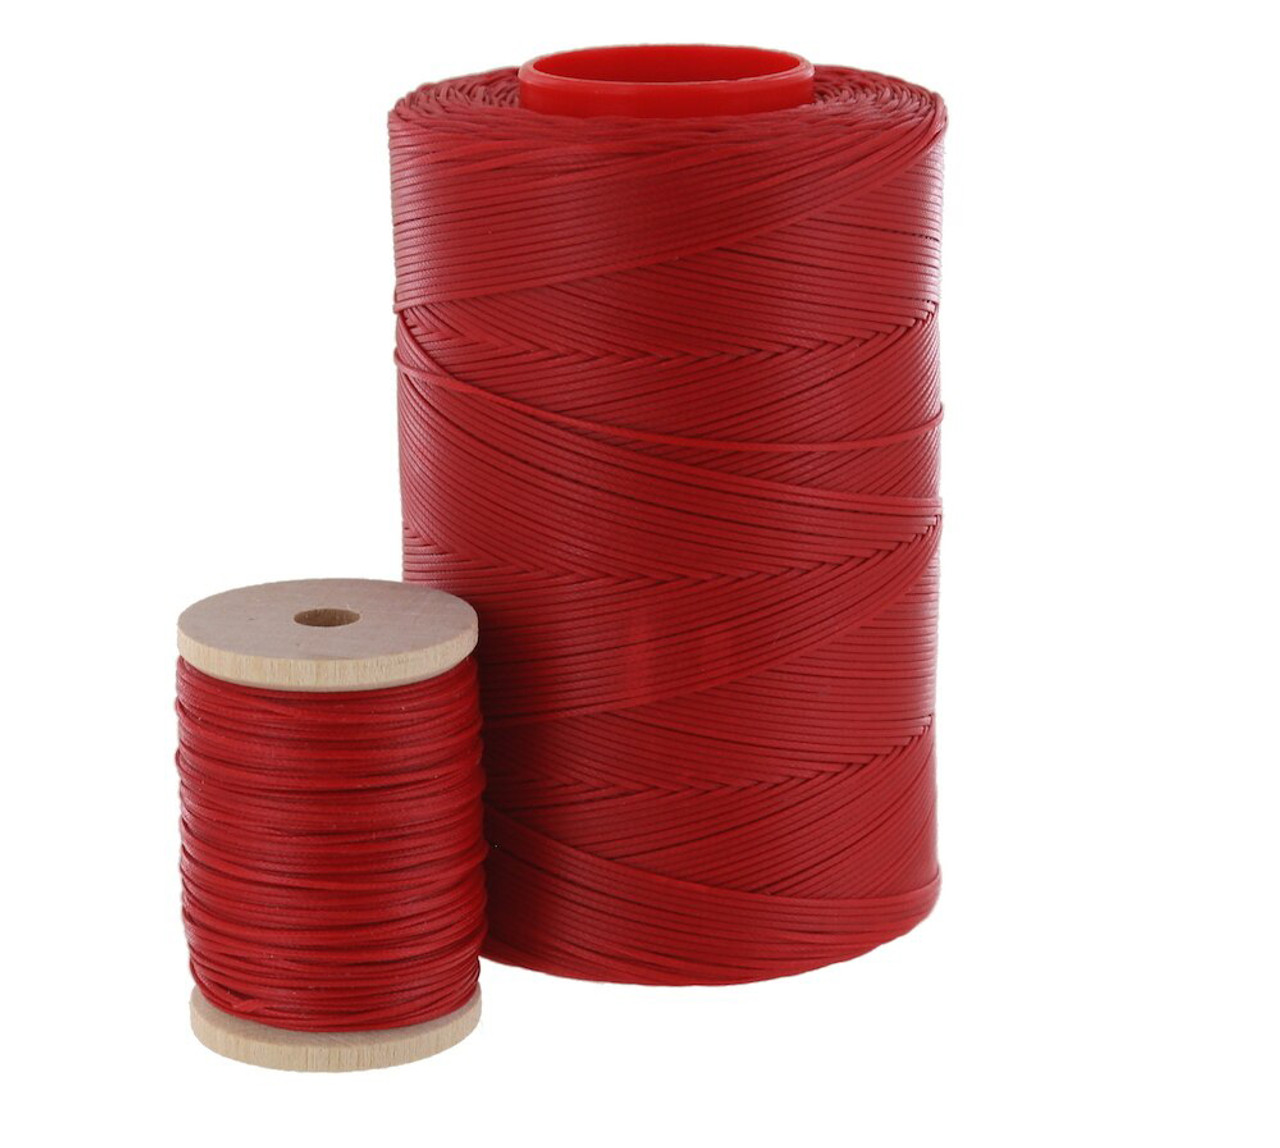 Waxed Polyester Thread For Sewing Leather